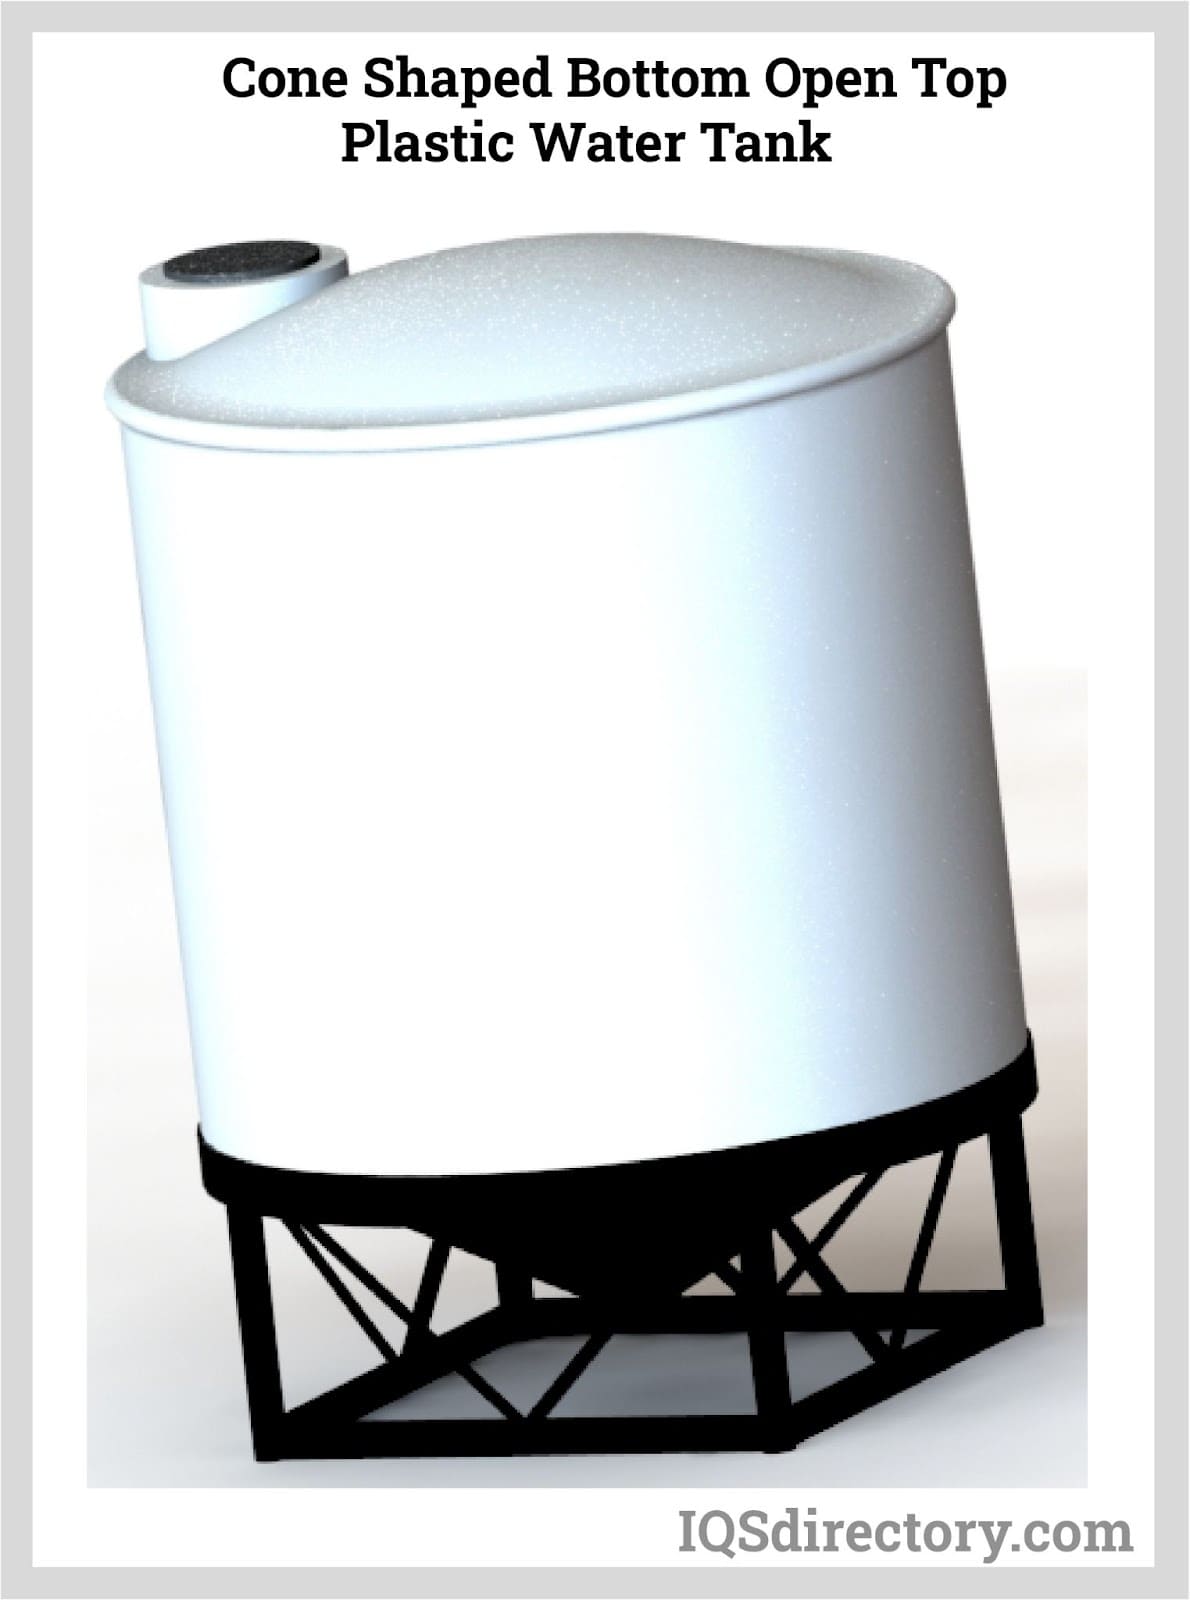 Cone Shaped Bottom Open Top Plastic Water Tank